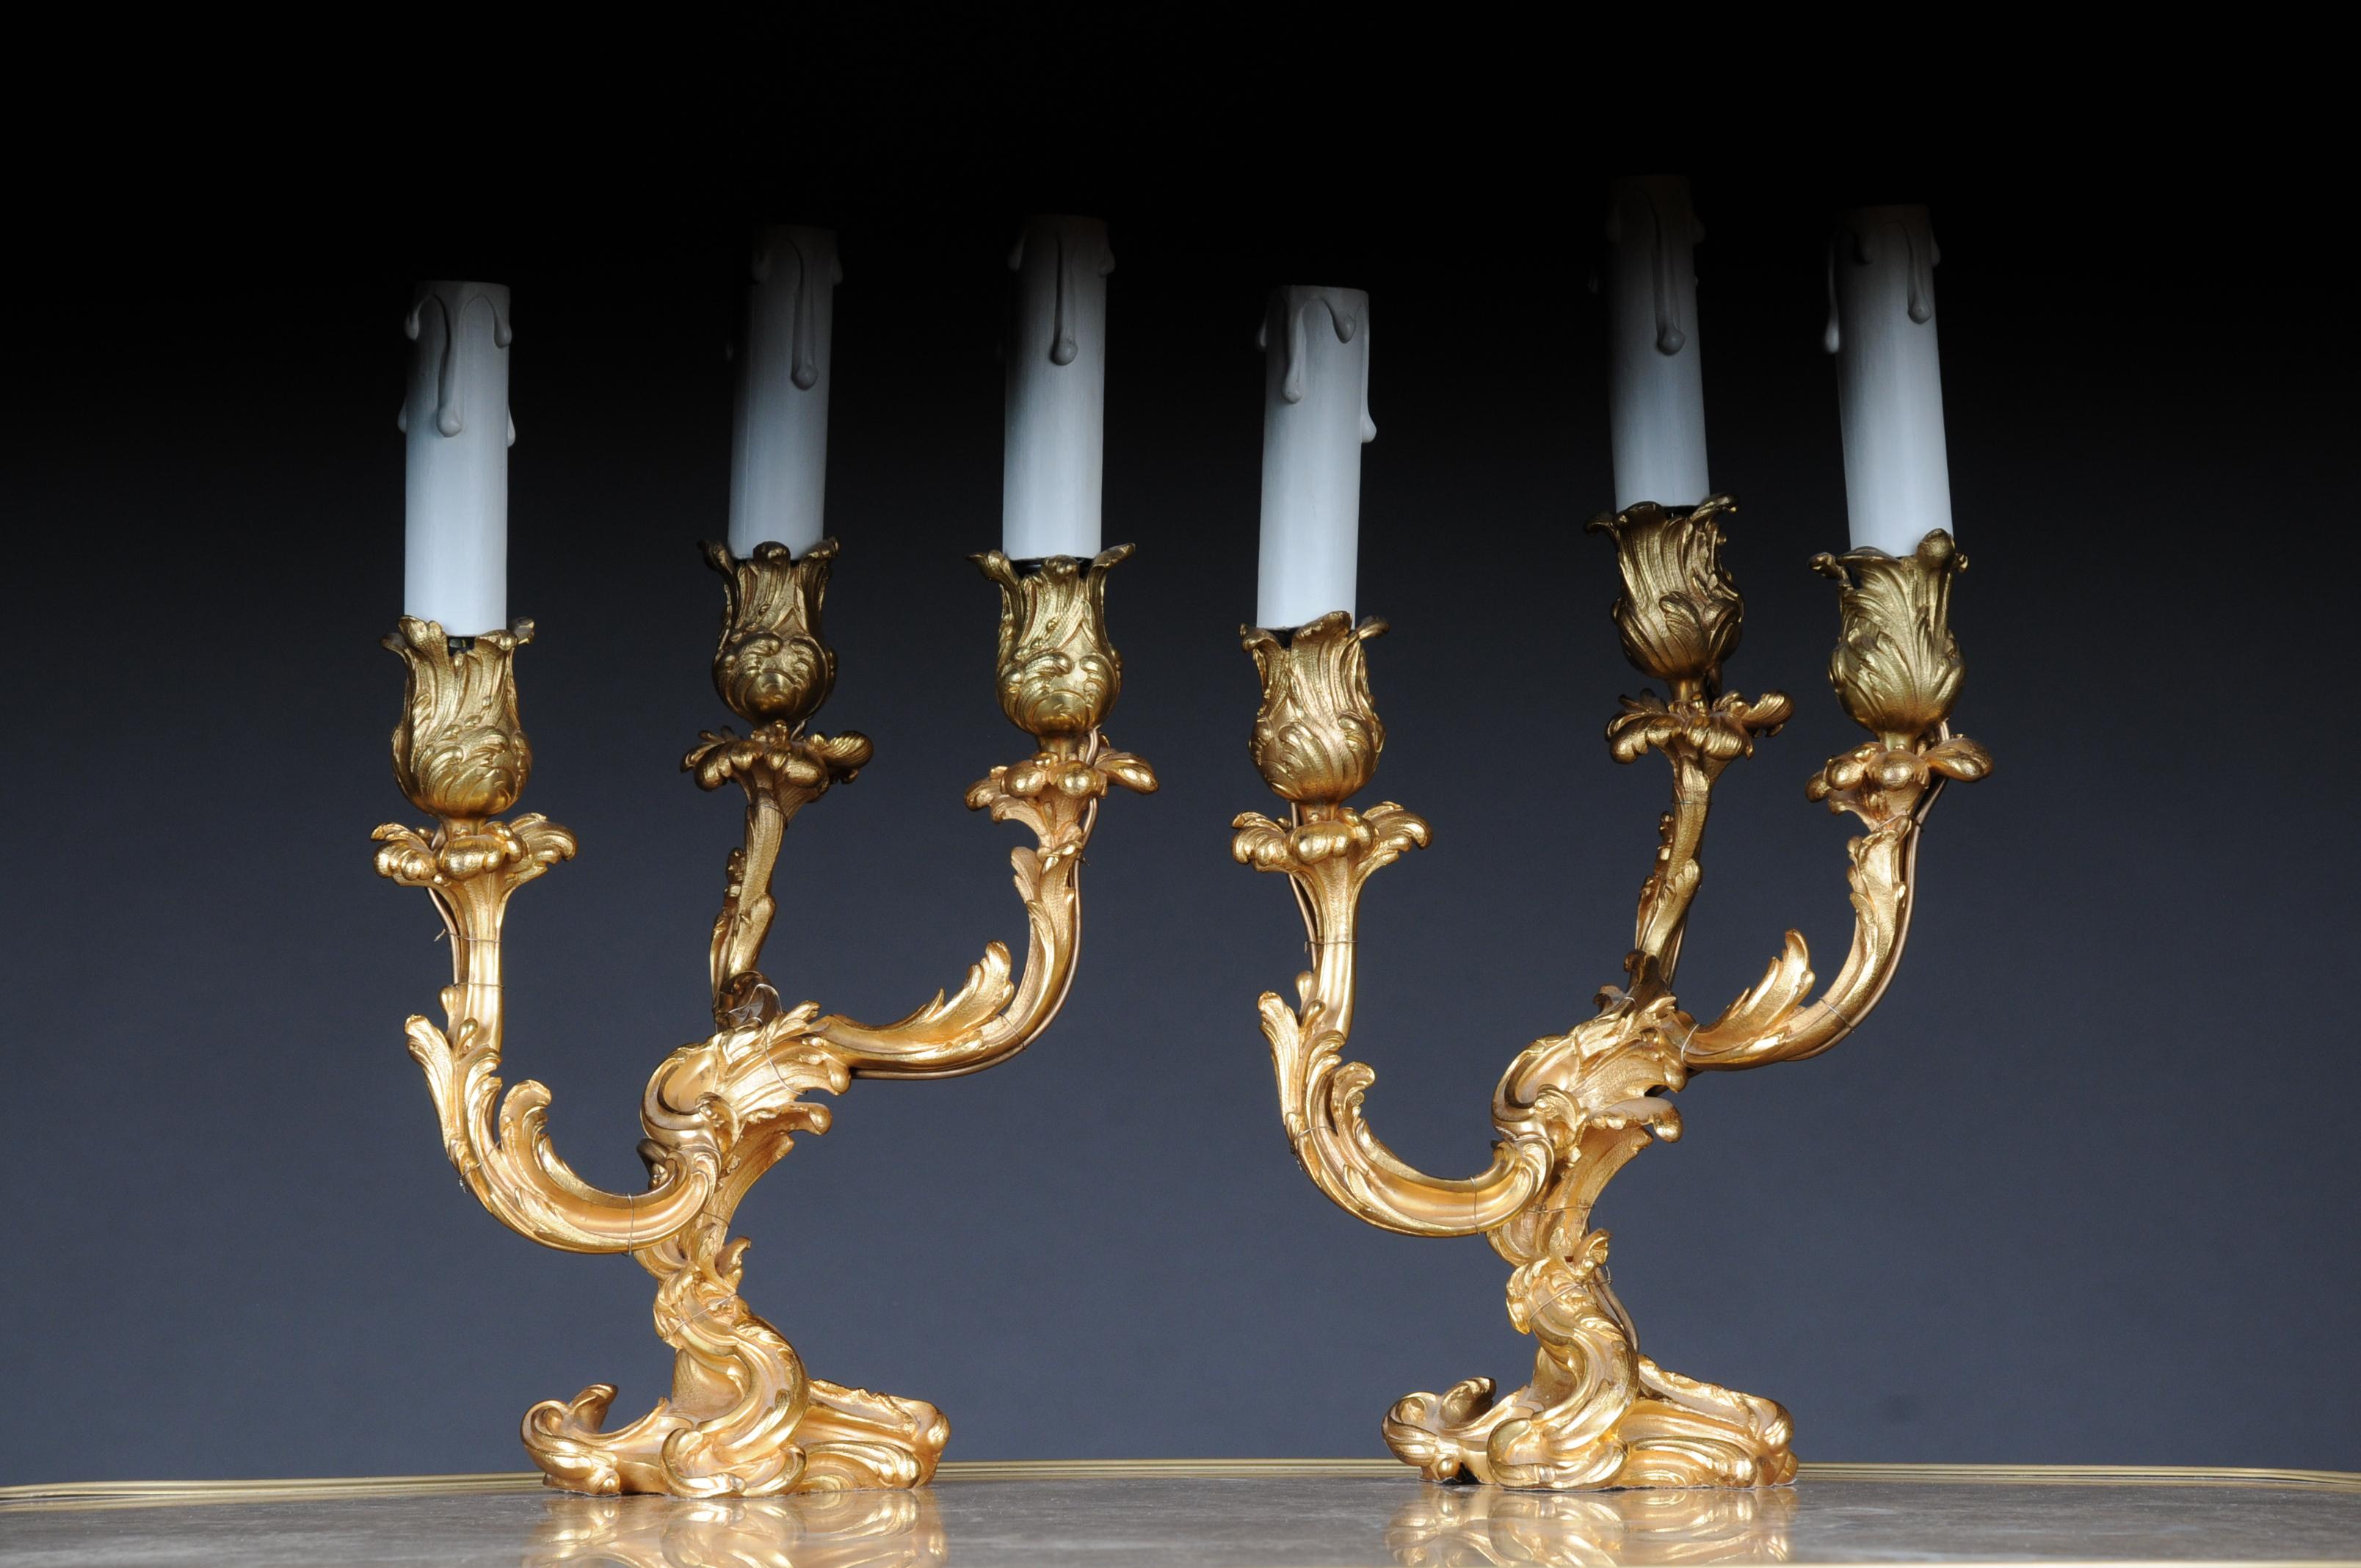 20th century Pair of French candle lamps bronze, electrified. 
Richly carved body, solid bronze gilded. Each 3-flame arms electrified. Extremely decorative and high quality workmanship. 20th century

(F-99)